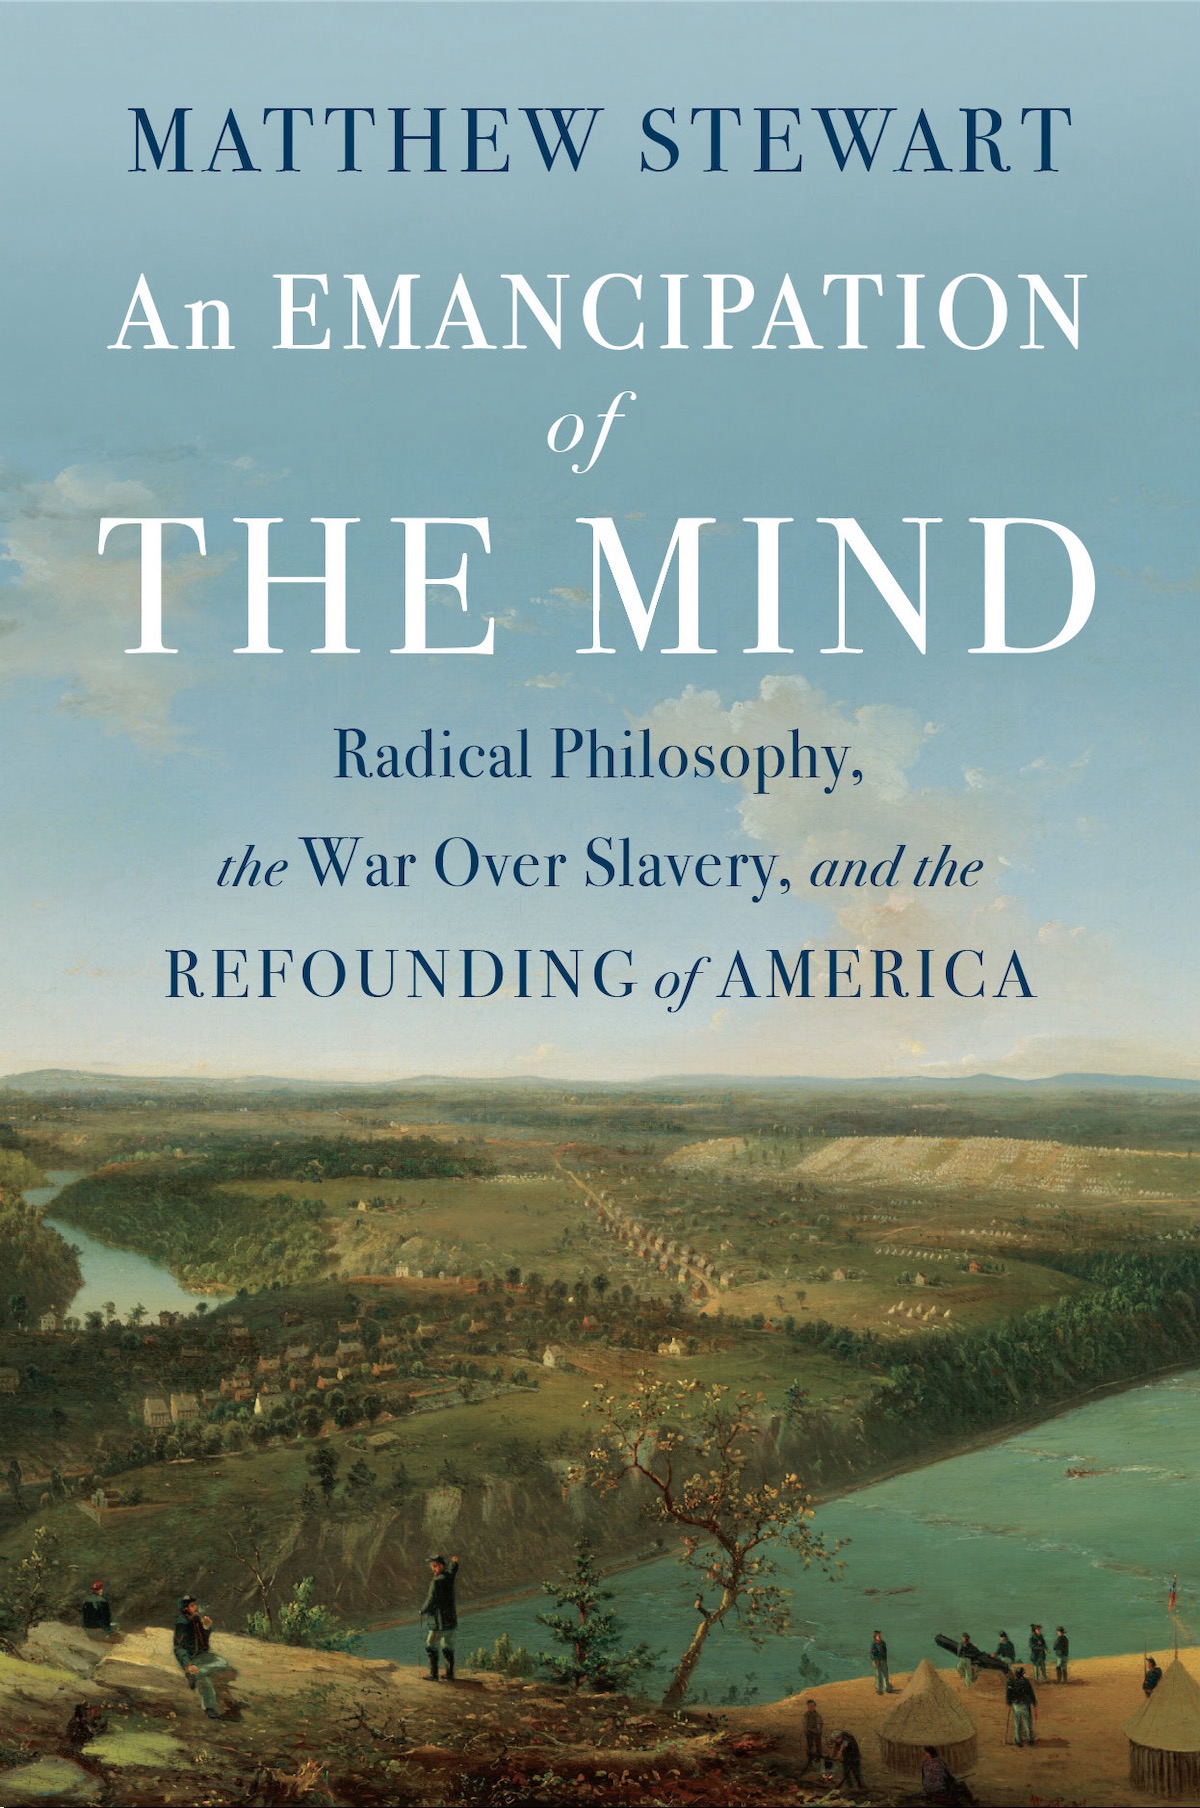 An Emancipation of the Mind book cover